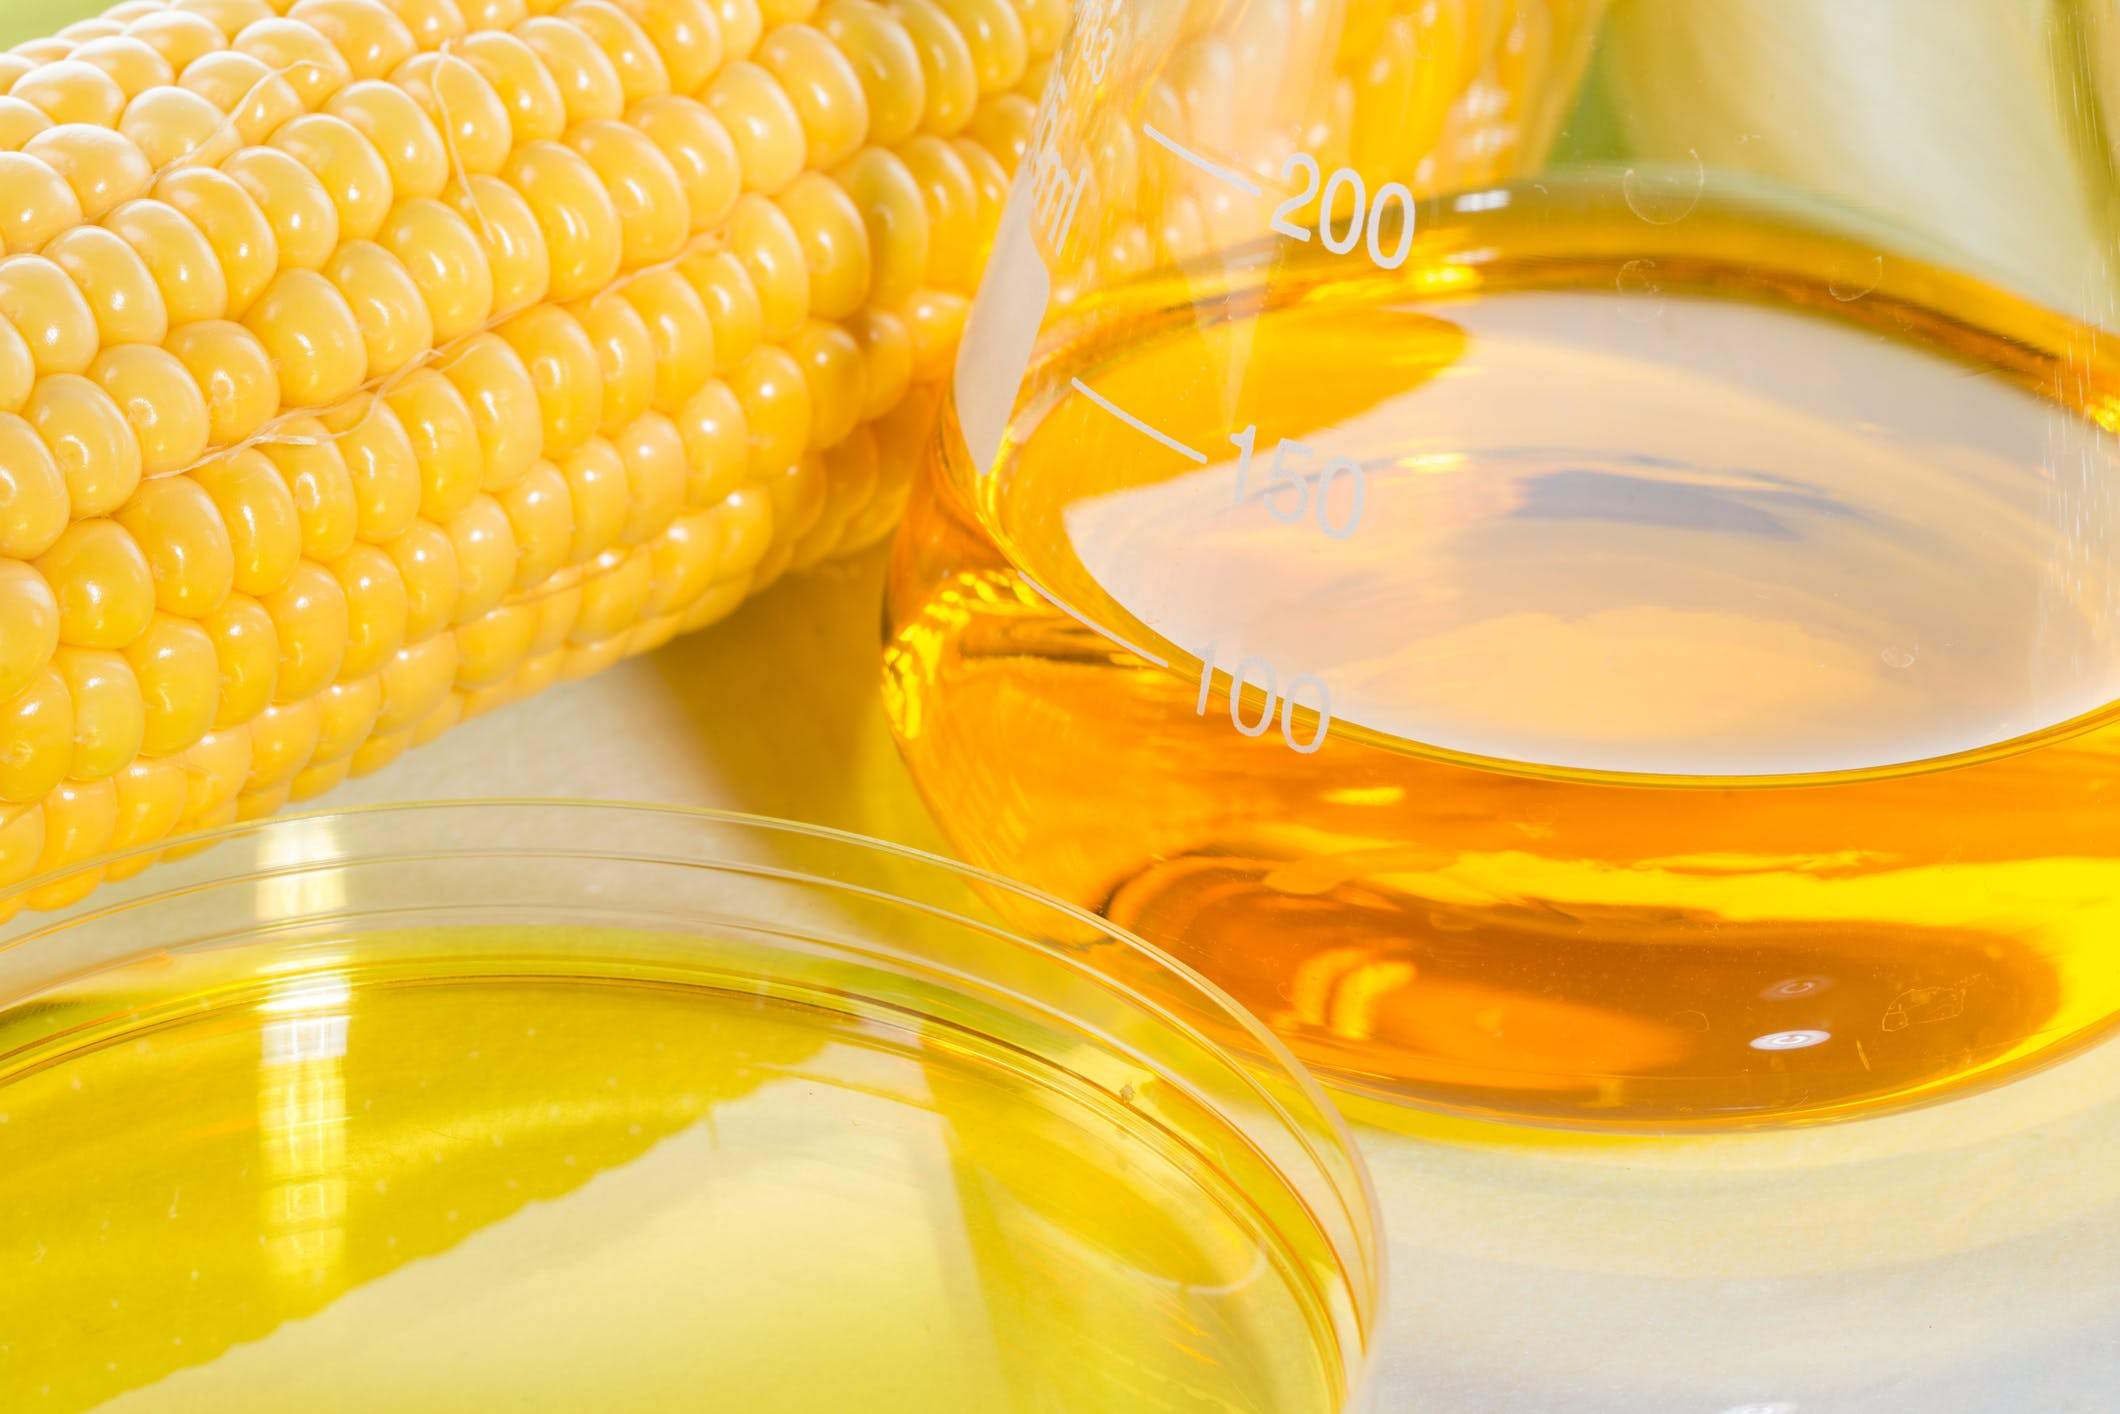 5 Reasons High Fructose Corn Syrup Will Kill You